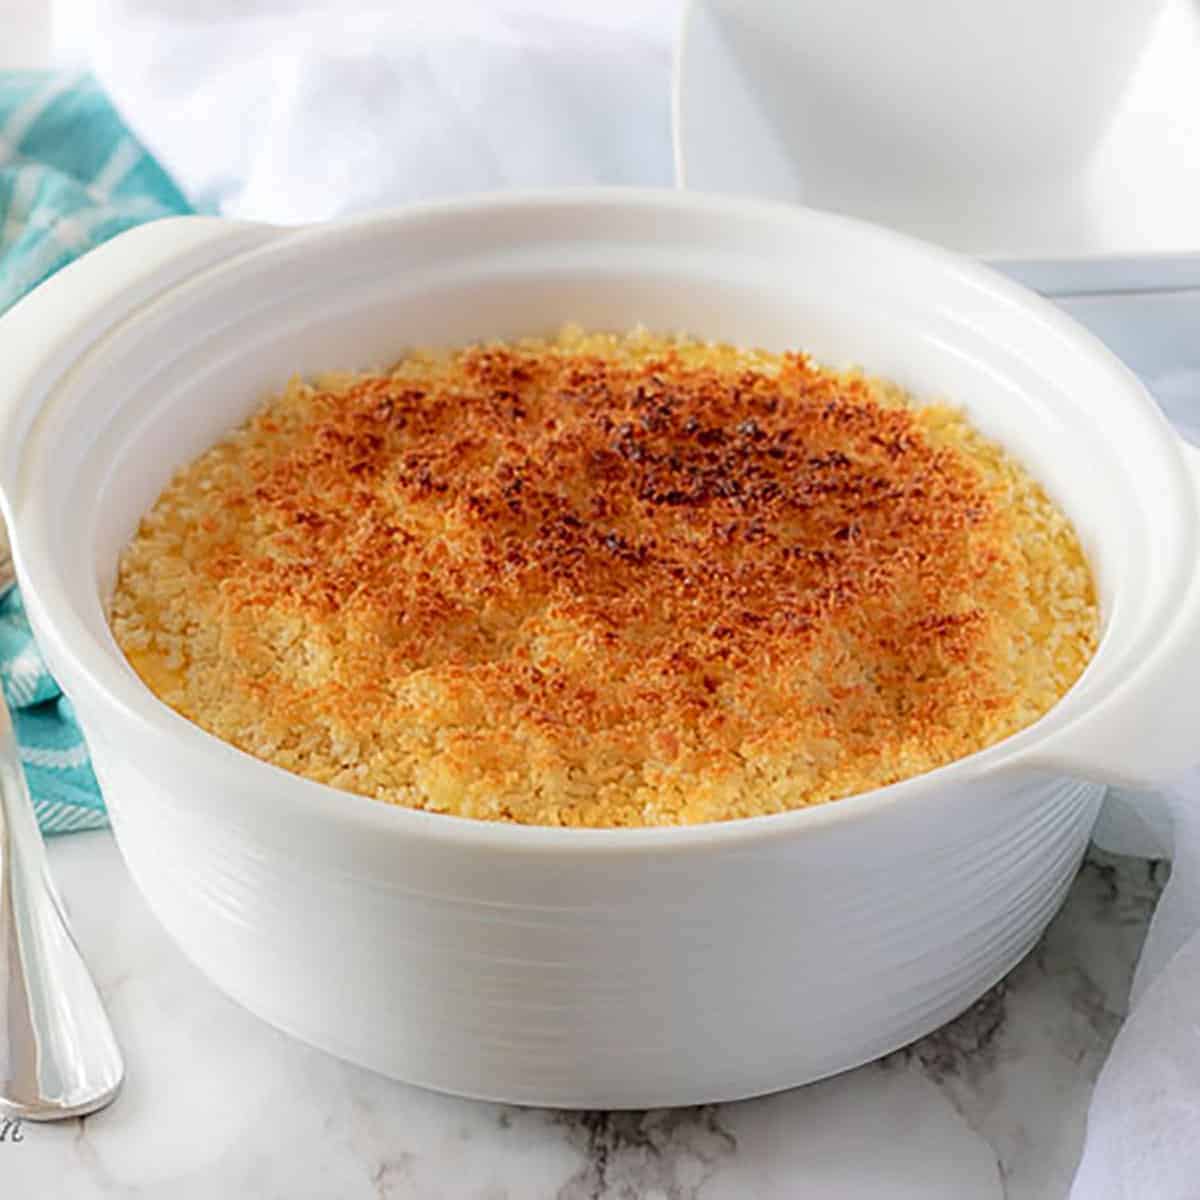 Casserole dish filled with funeral potatoes topped with toasted breadcrumbs.